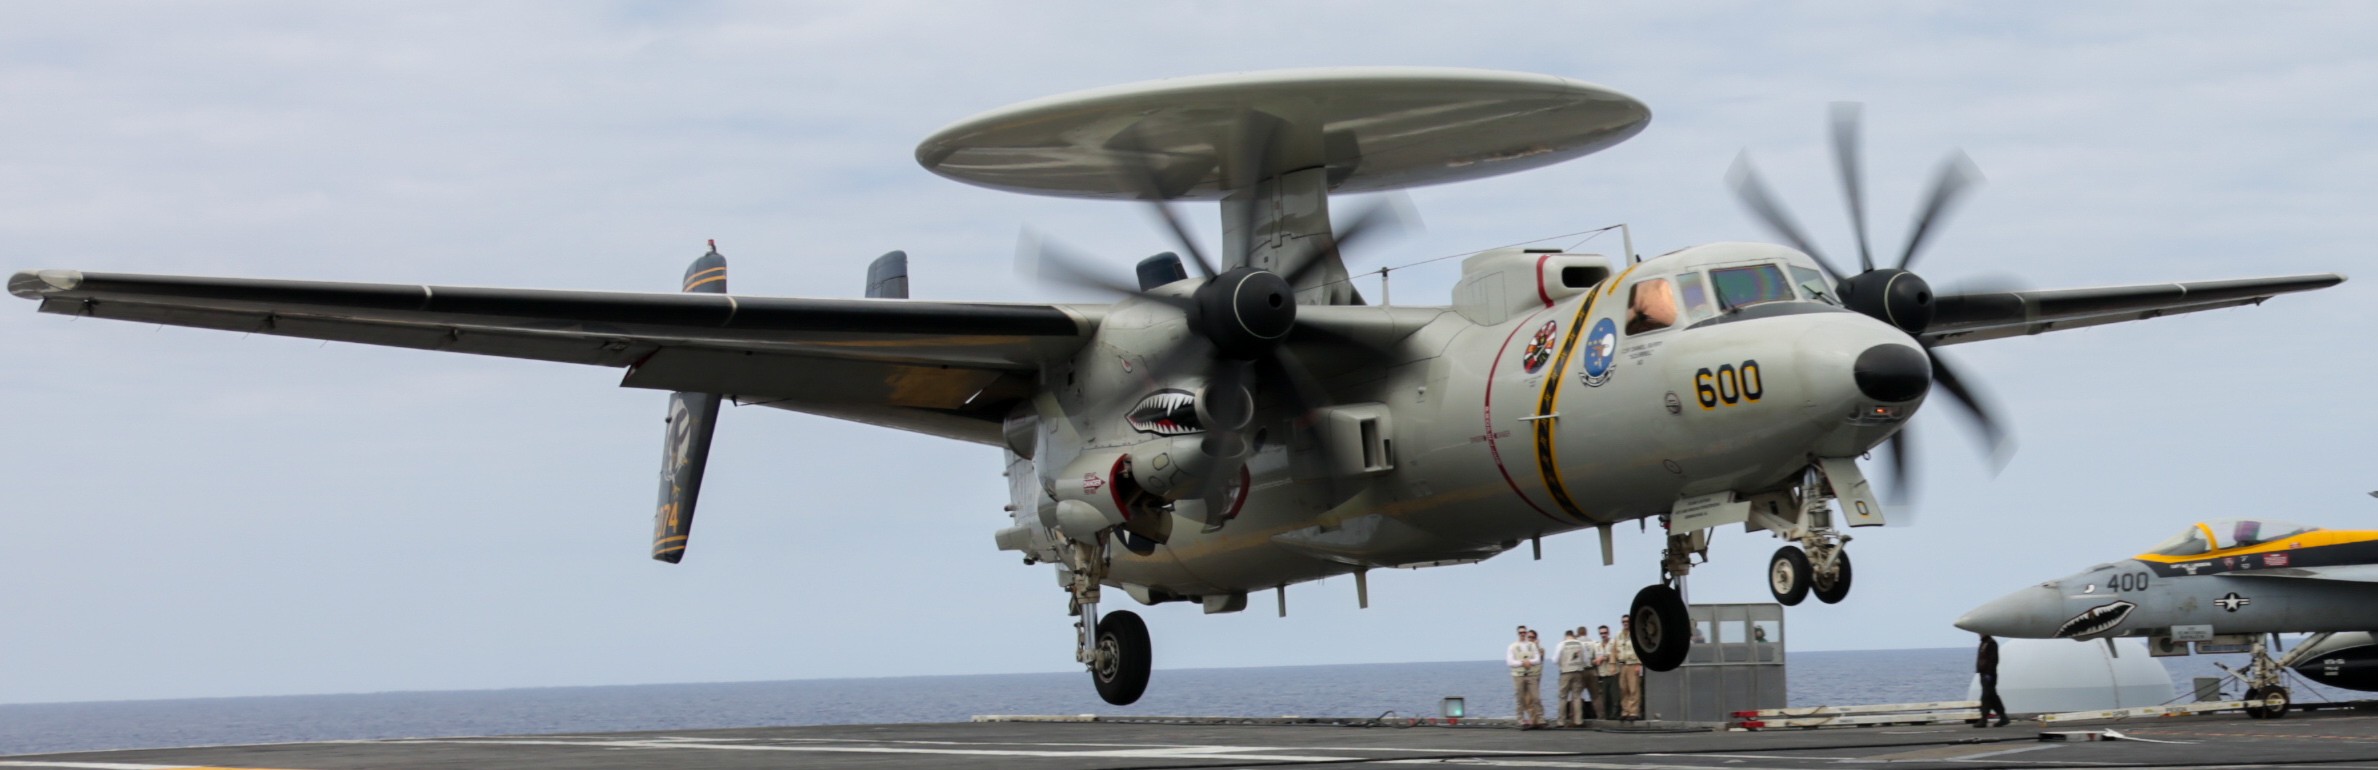 vaw-117 wallbangers airborne command and control squadron navy e-2d hawkeye cvw-9 uss abraham lincoln cvn-72 181